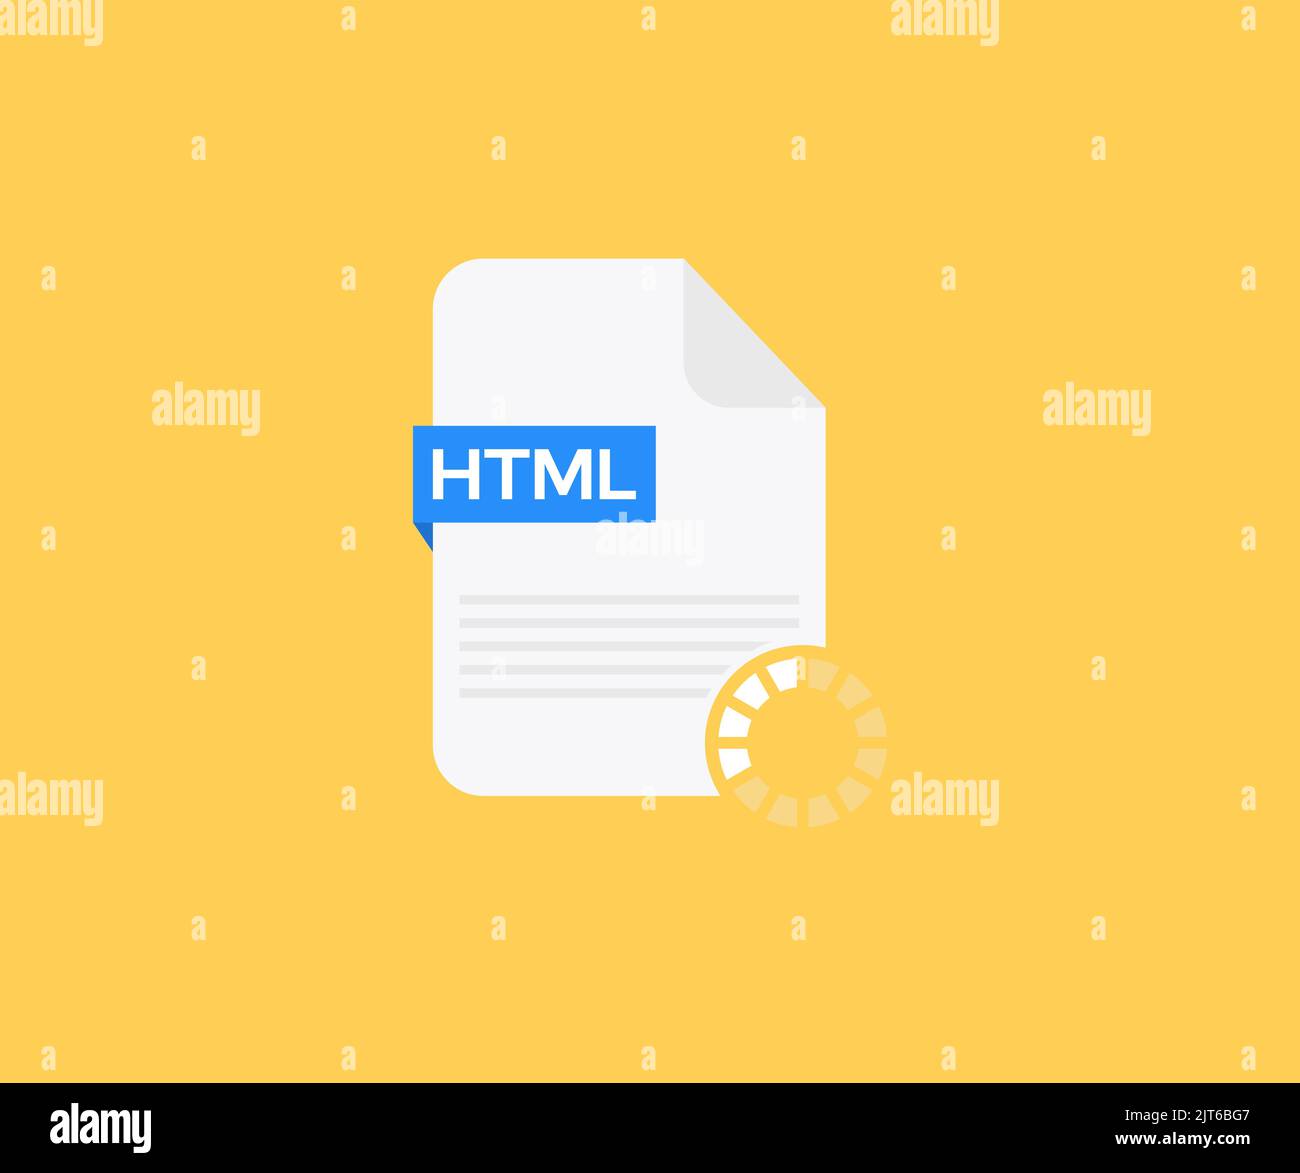 HTML File Icon logo design. Download buttons for web site or app. Data vector design and illustration. Stock Vector